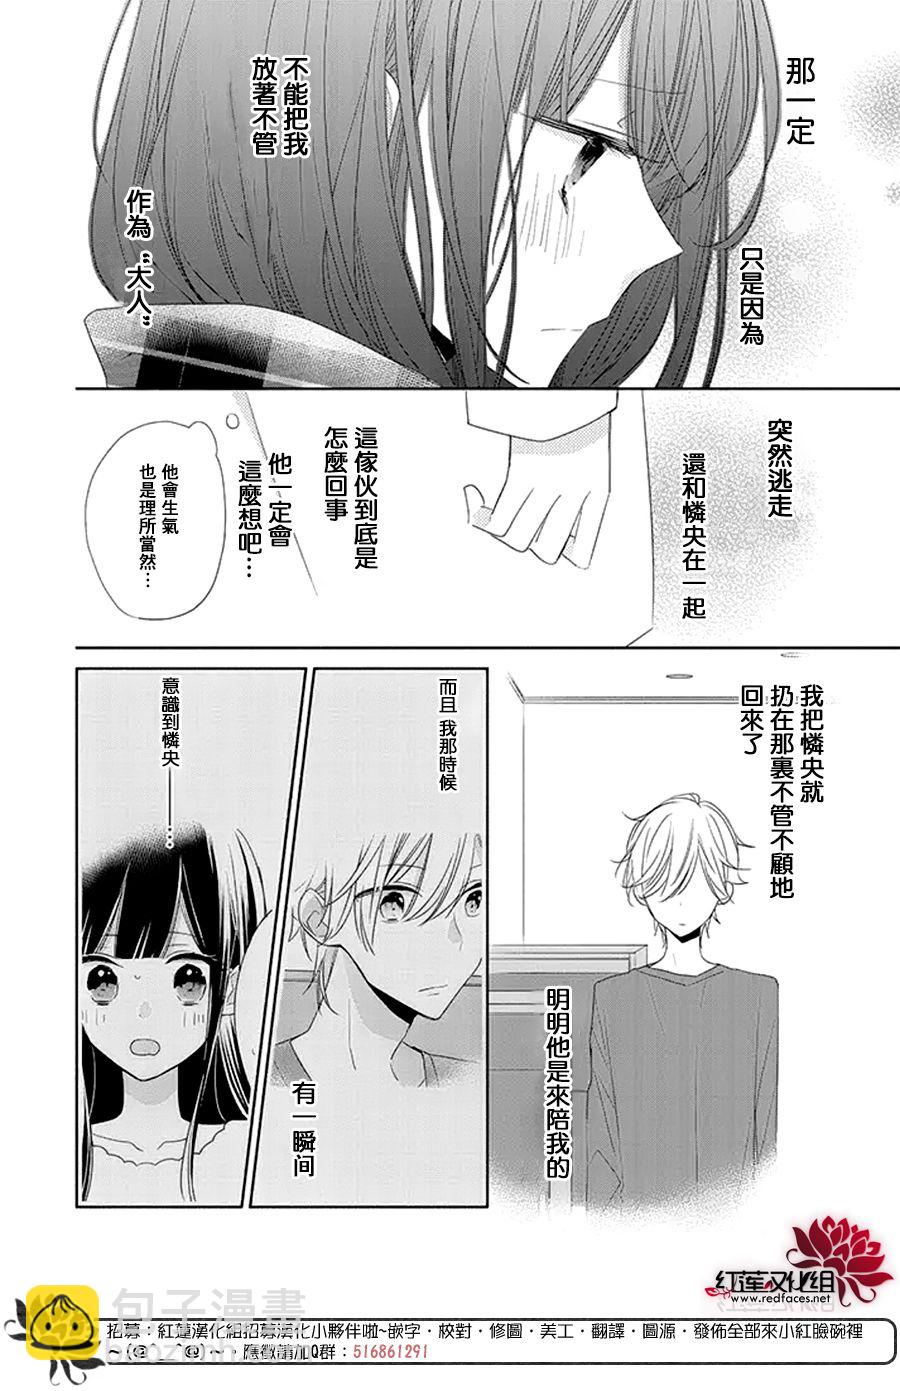 If given a second chance - 21話 - 6